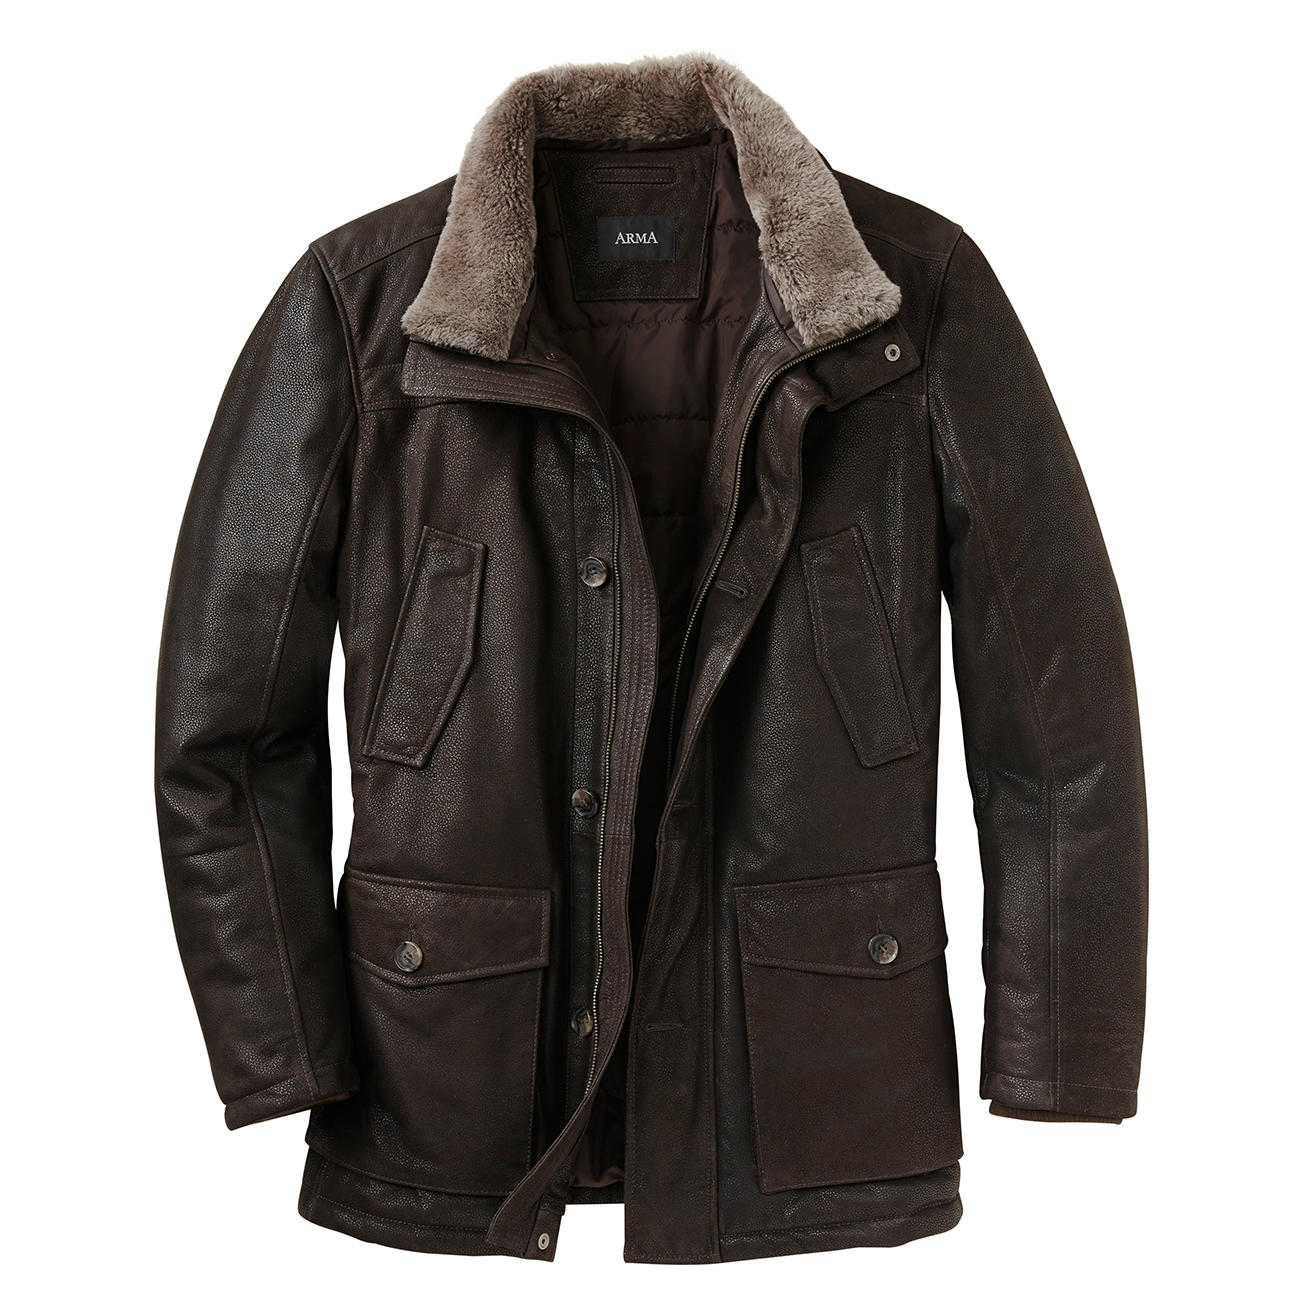 Arma Himalaya Goat Leather Jacket - Extremely soft and as light as a ...